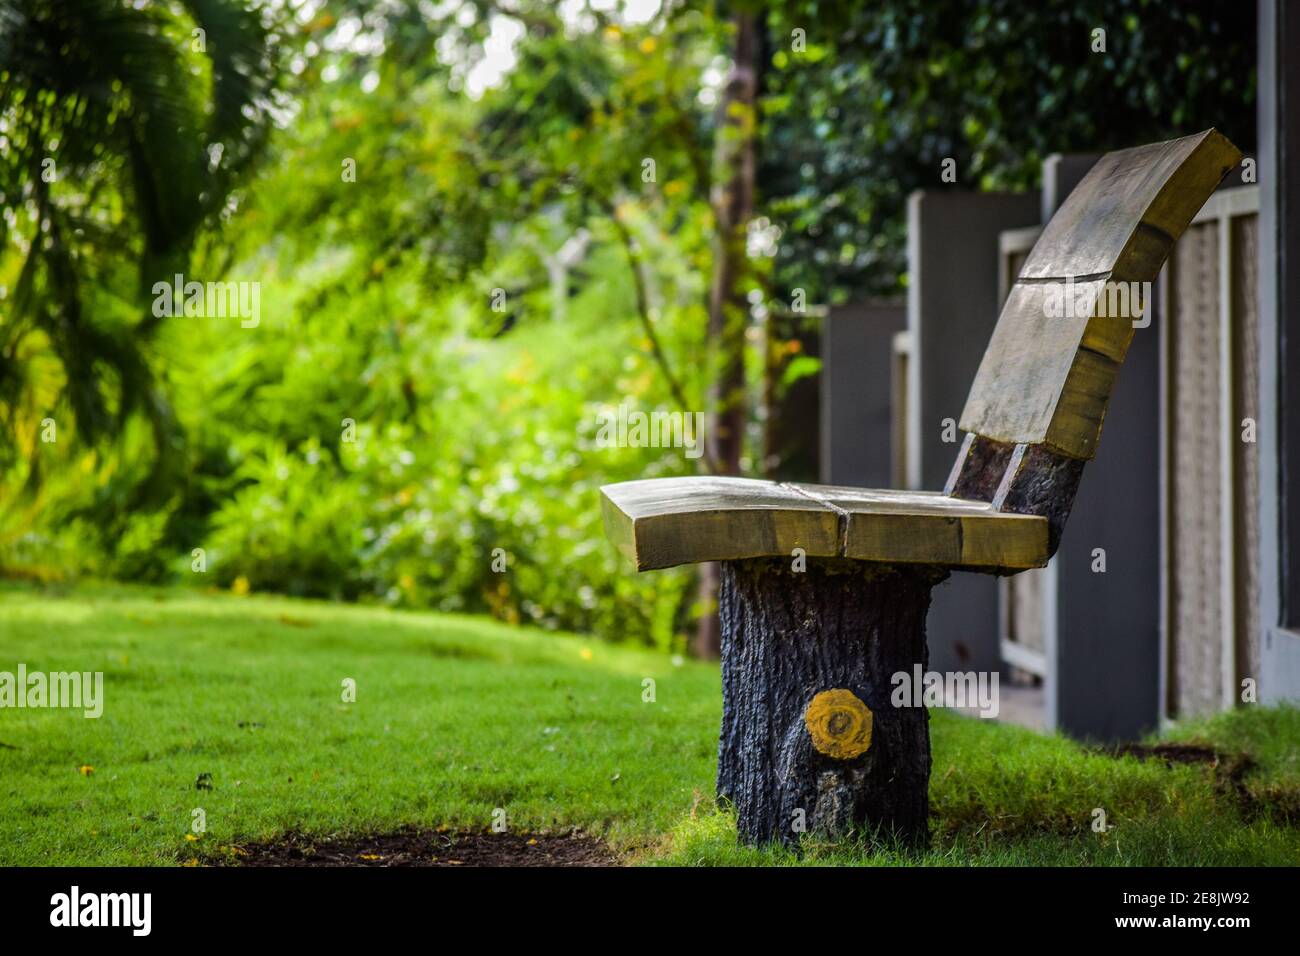 Wooden Garden bench in the garden on the lawn during day with green blurry background. Stock Photo